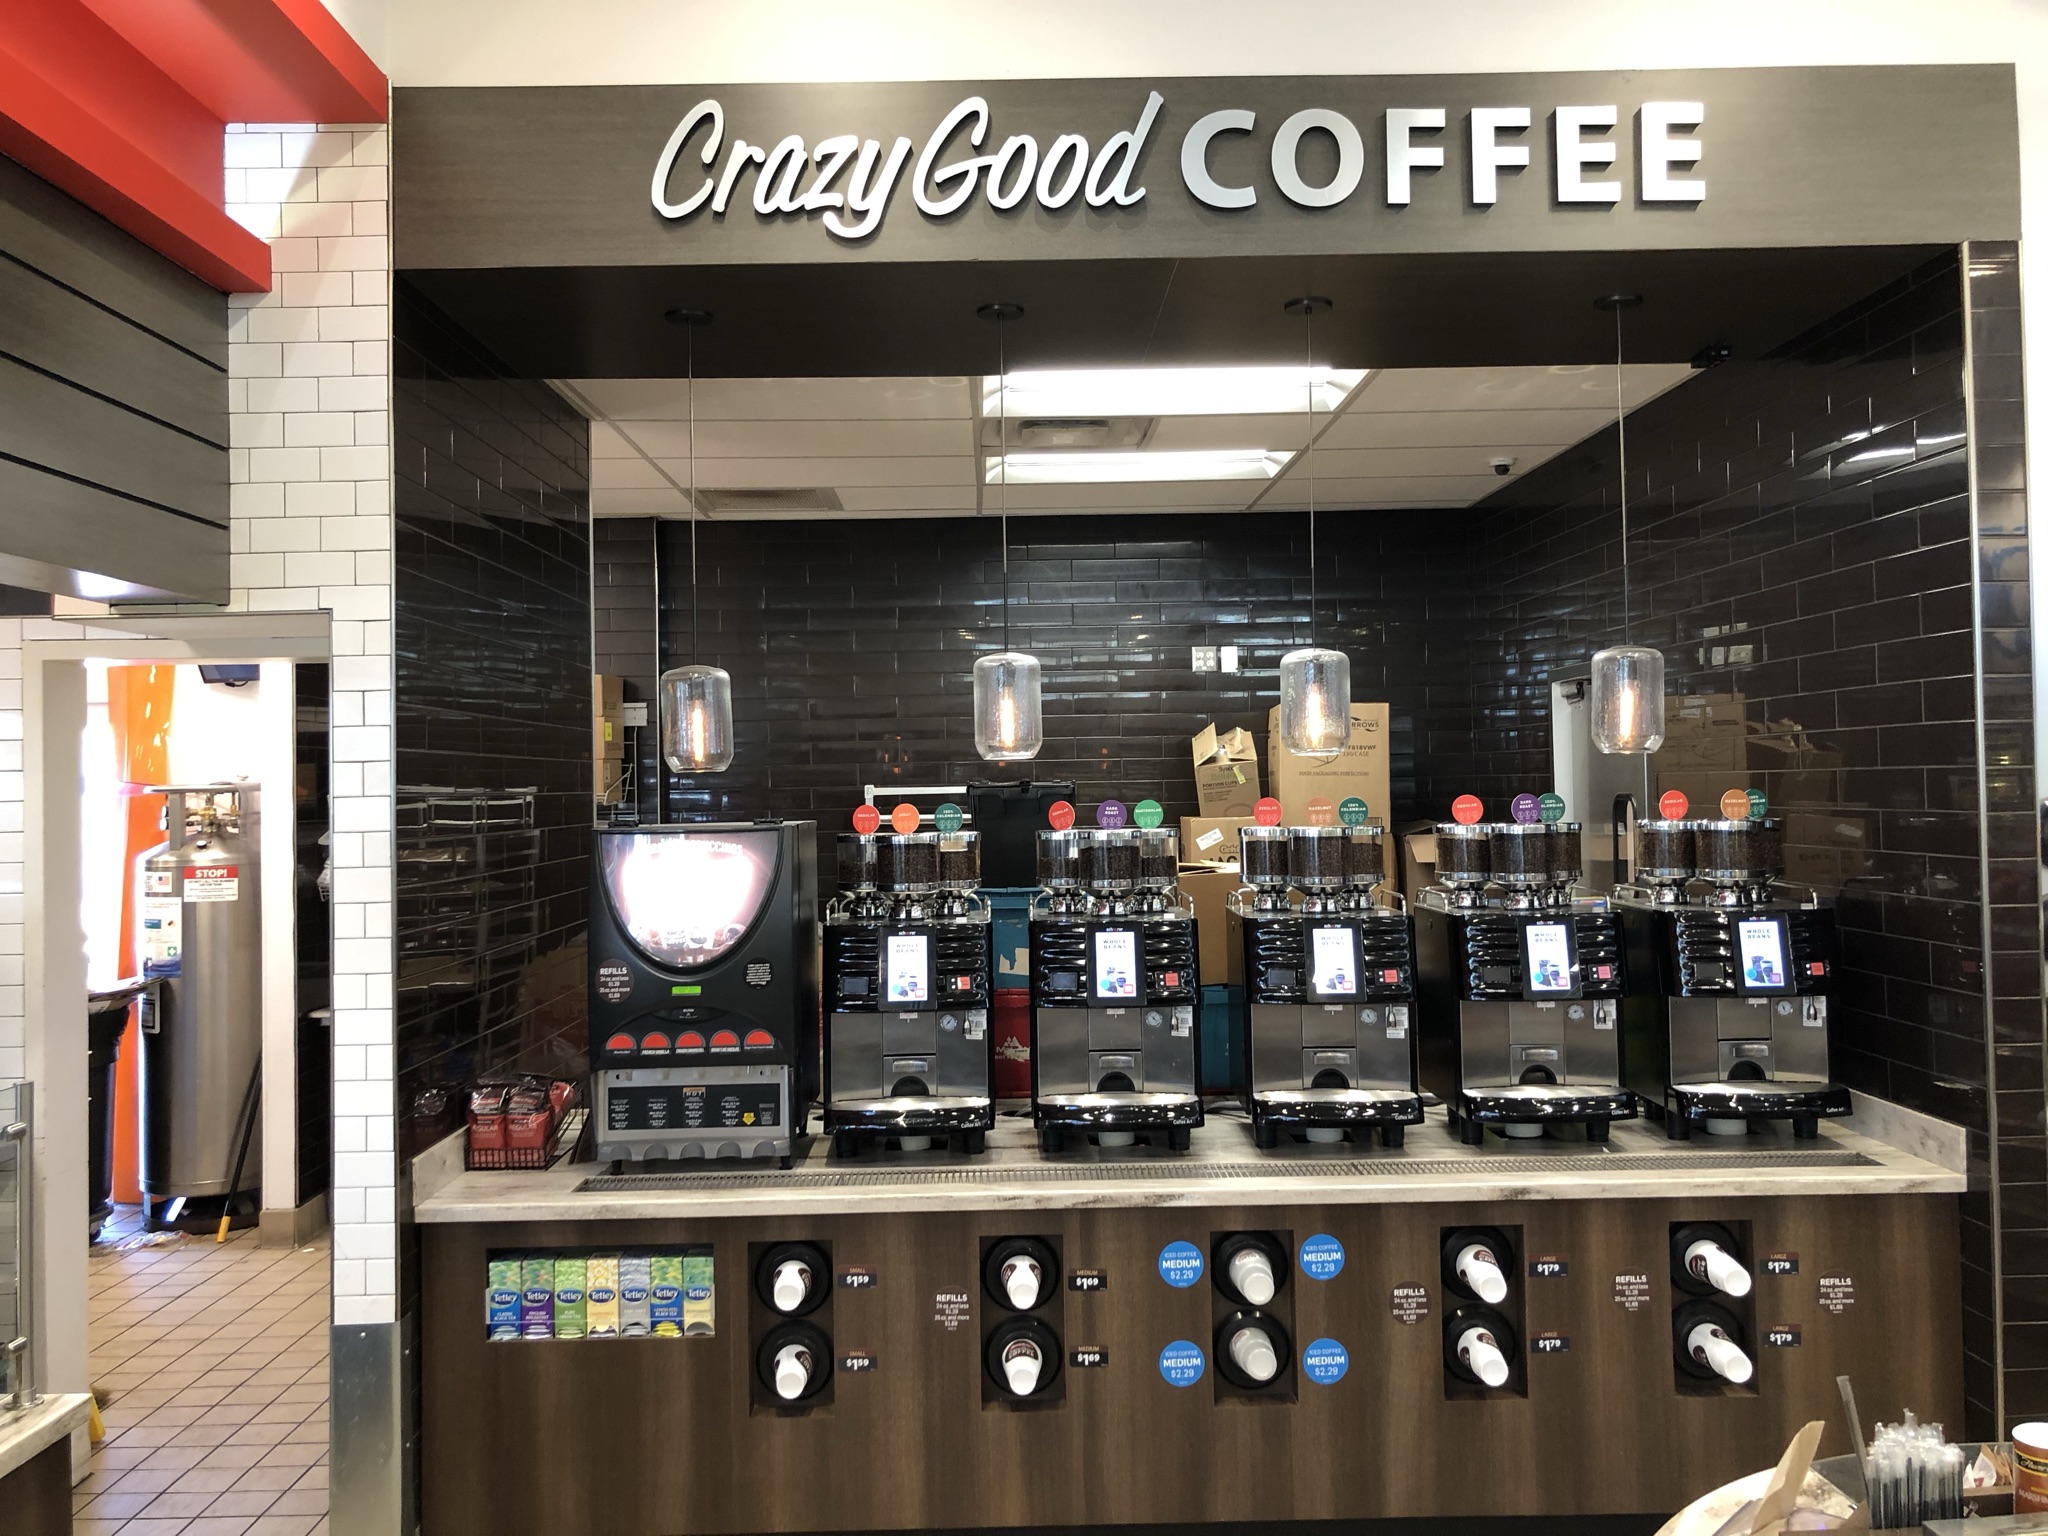 Available property at RaceTrac Coffee Area